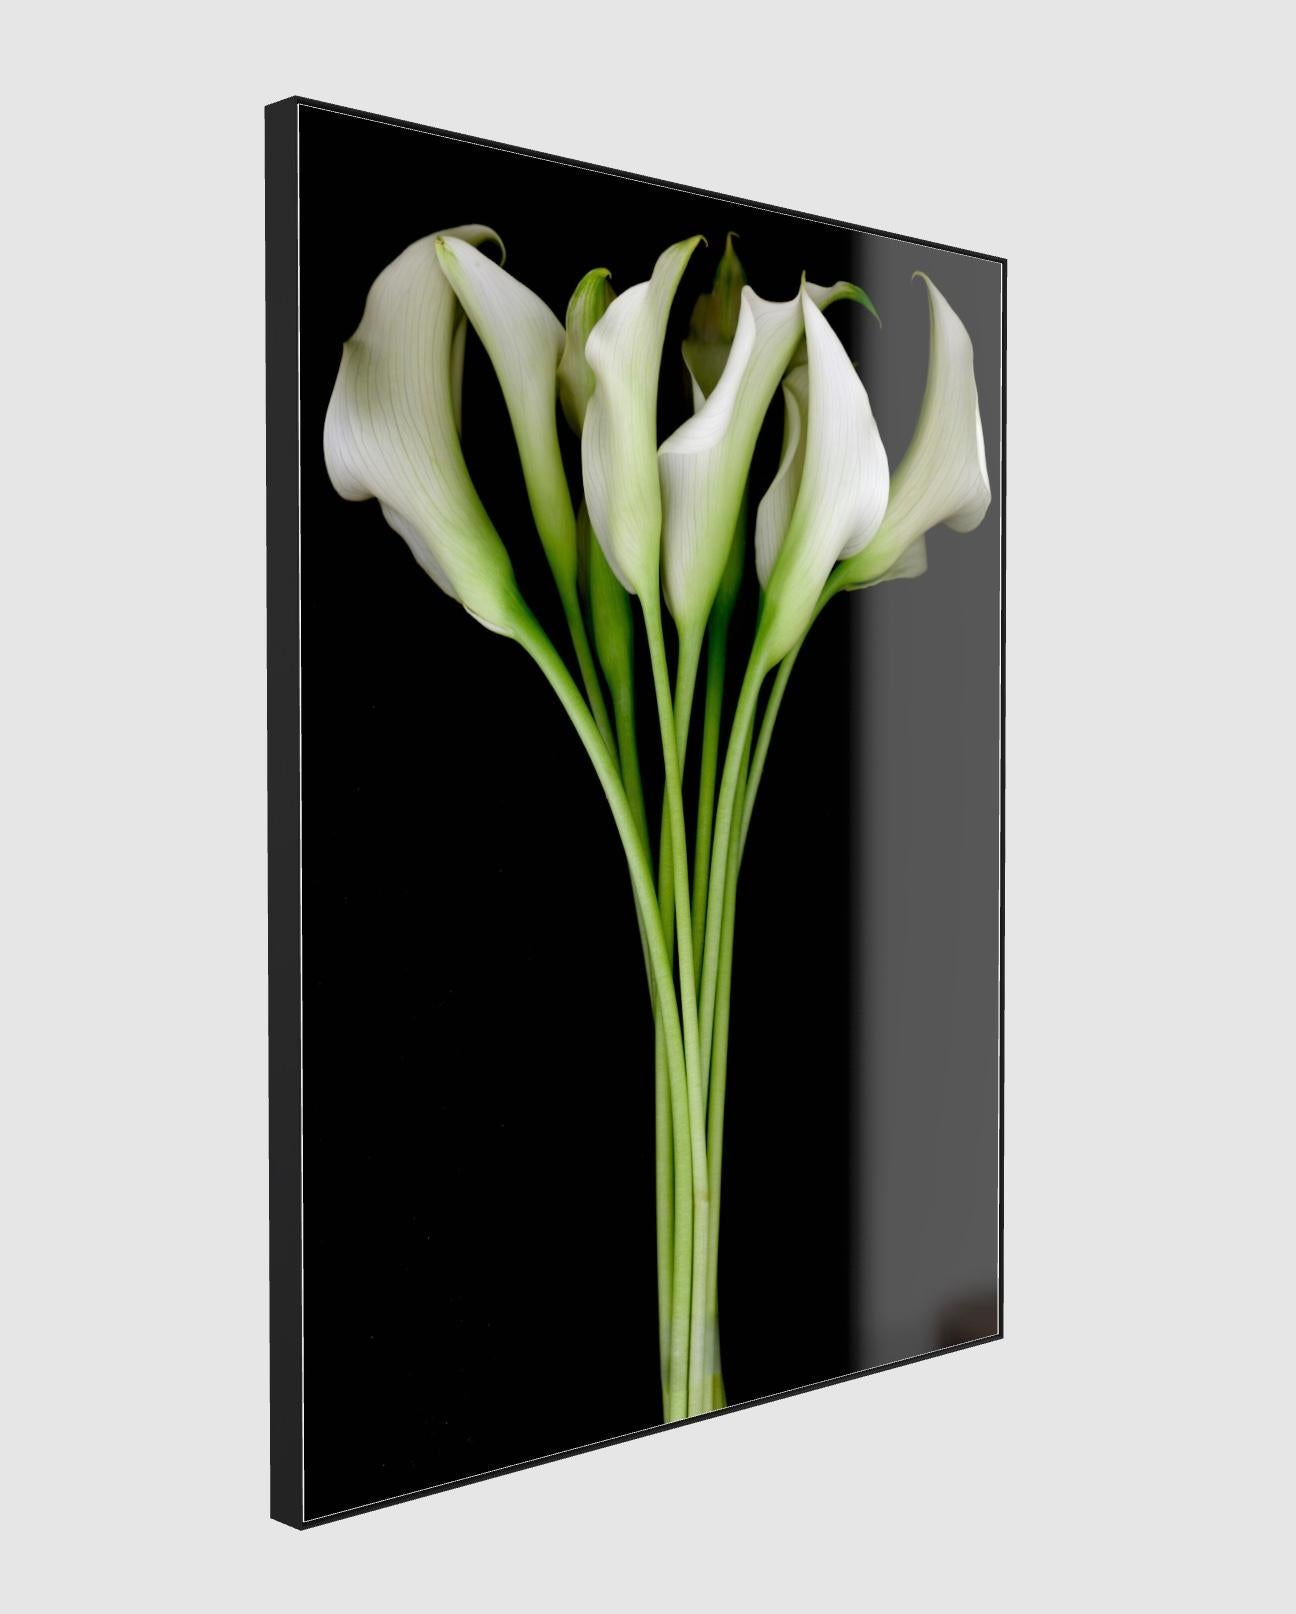 High quality photography with pristine details, large scale.
Mounted under Acrylic Glass for best rendering and protection, with two options : Slimcase  or framed in an 2” deep Aluminum Artbox (black or Silver)
Limited Edition of 7, signed by the